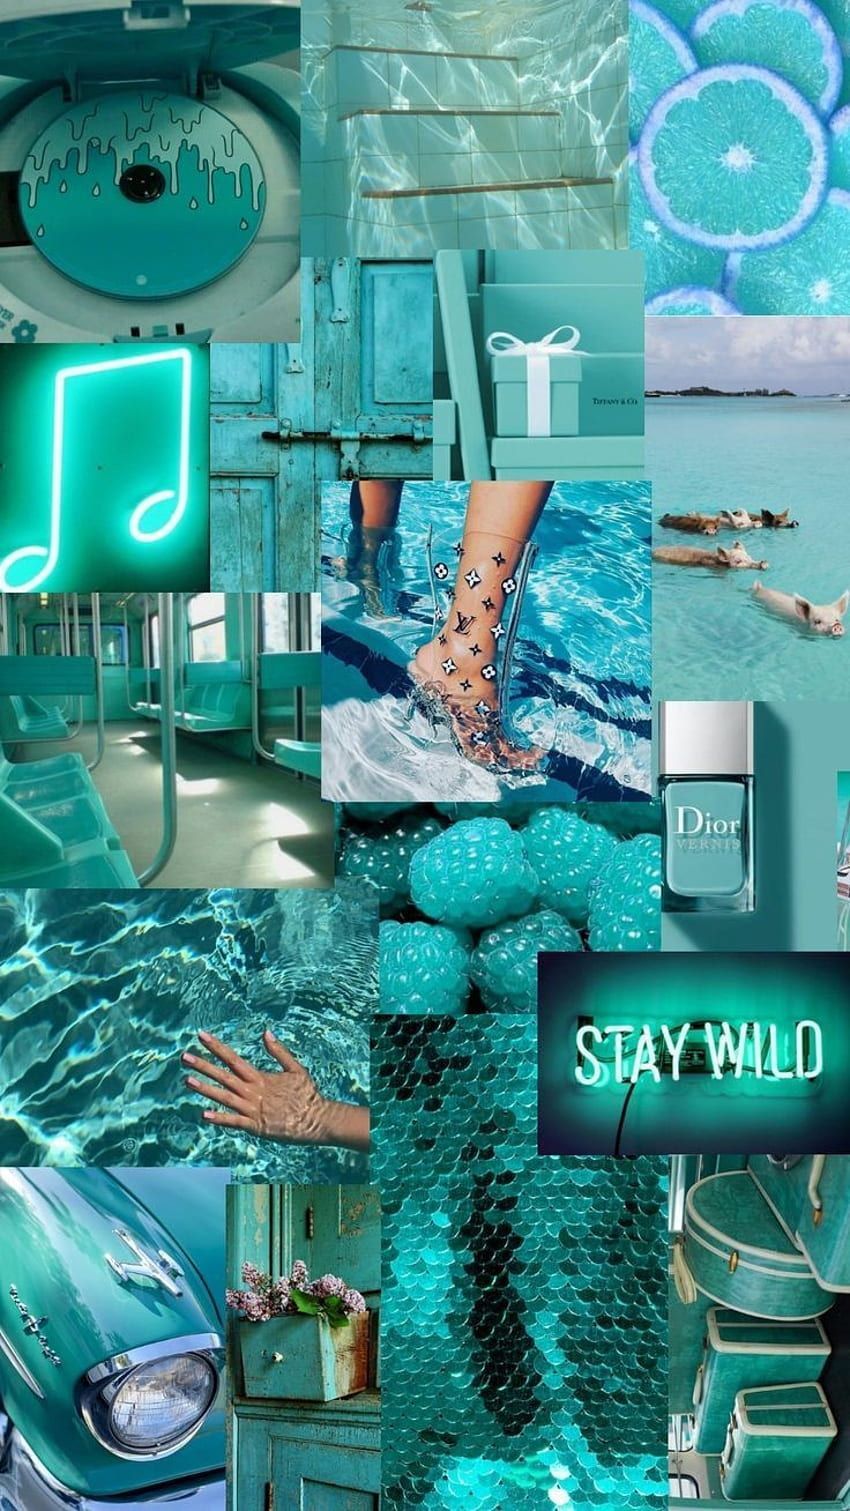 Aesthetic turquoise background with a car, gift, clock, and swimming pool - Aqua